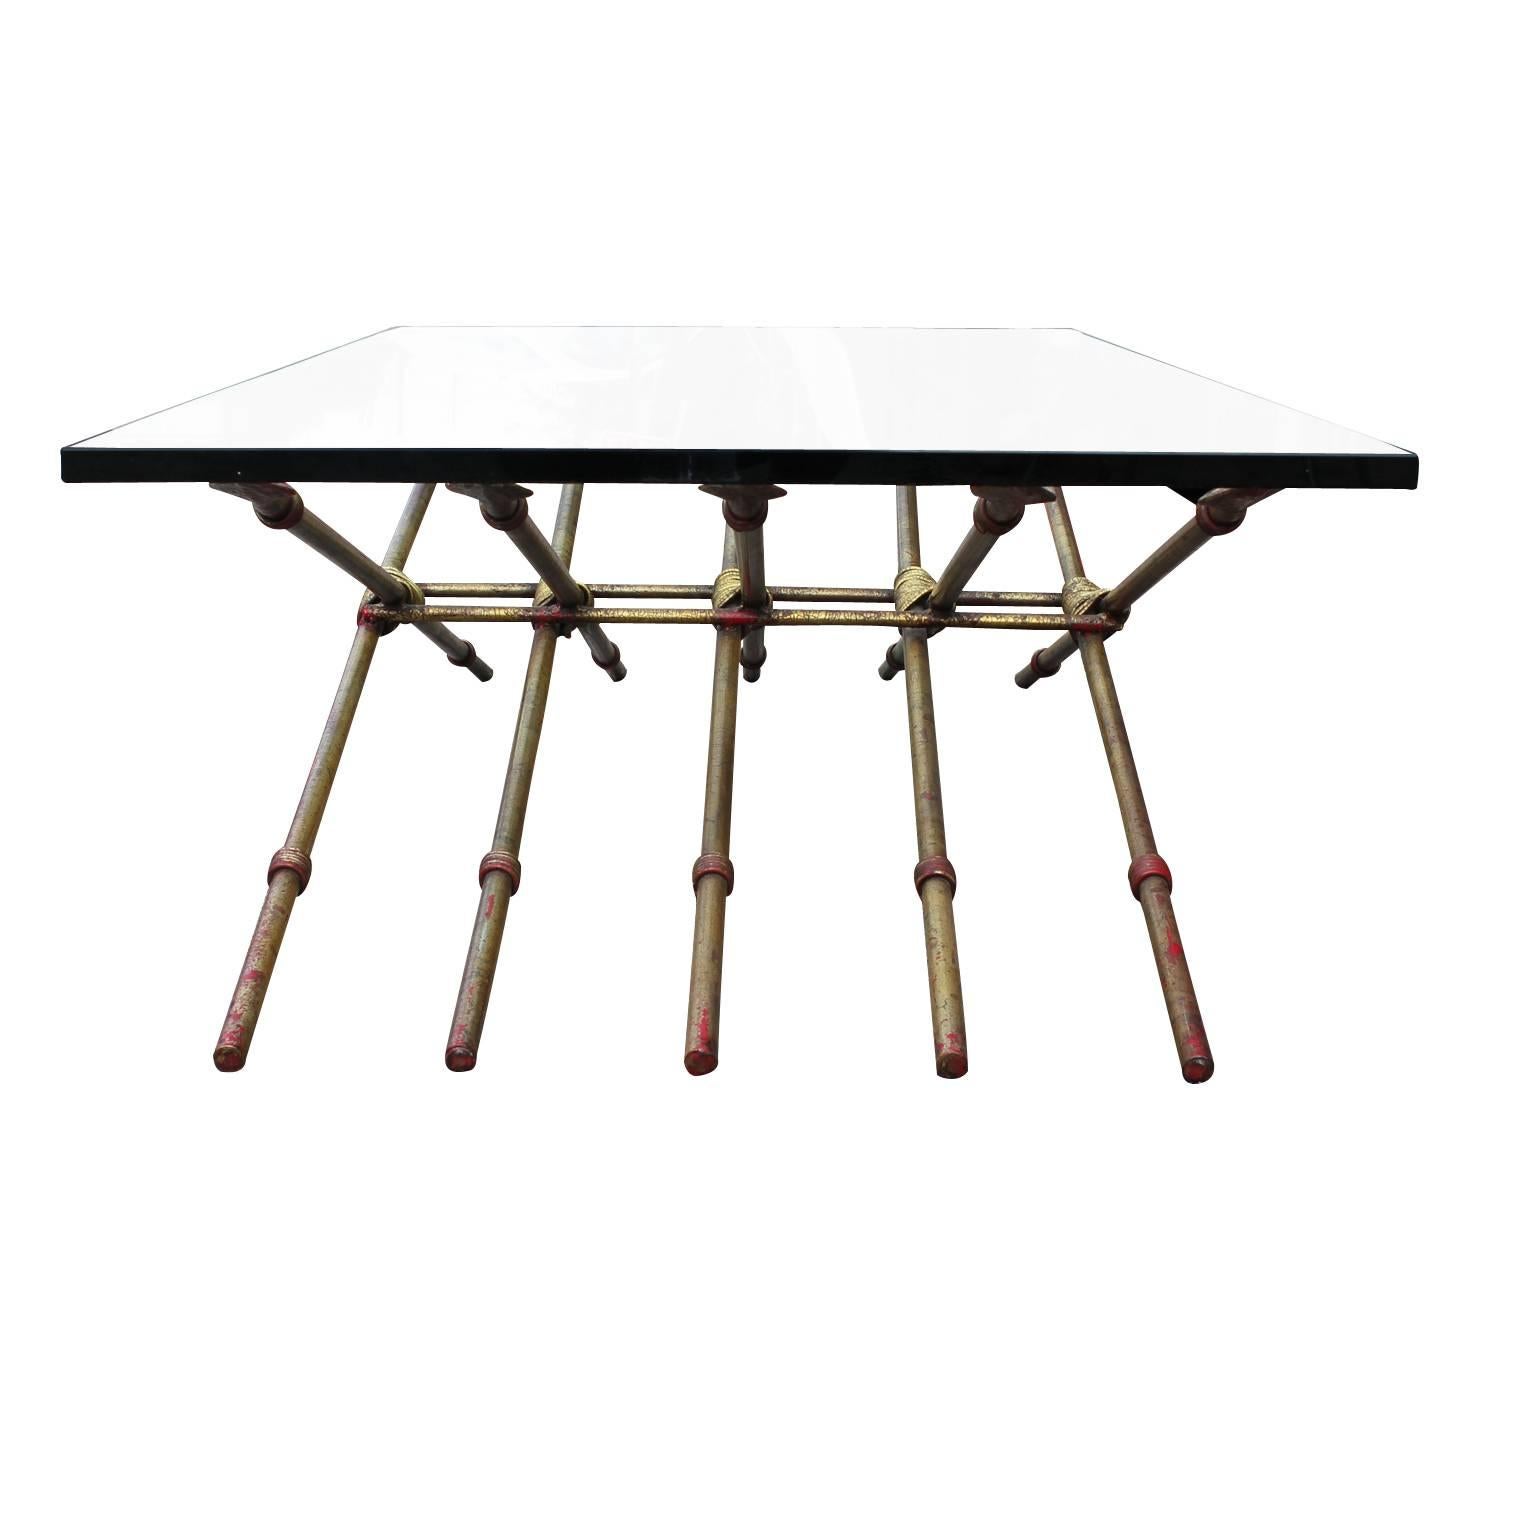 Ten gold leafed spears intertwined to make to a wonderful glass coffee table. The table is metal finished with a red underlay and gold leaf finish on top. The table has a Hollywood Regency or French feel to it. The gold spear table is in great